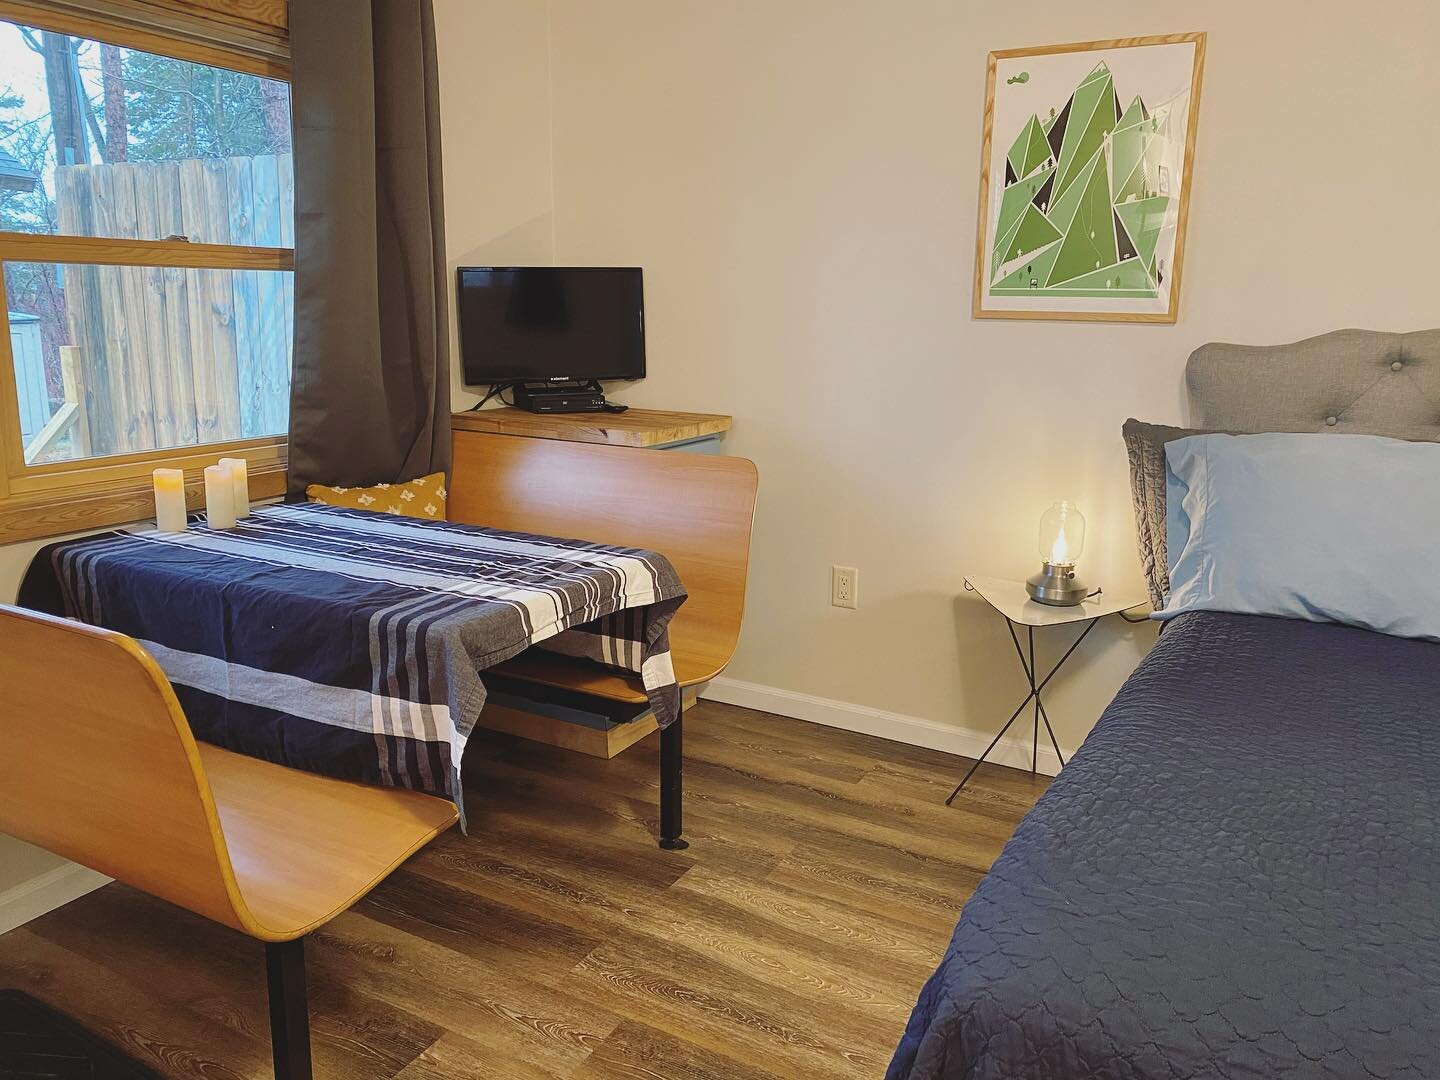 The Sawtooth Studio now offers a QUEEN size bed! Enjoy more room for you and all your pets or a human travel companion. Book now on our website or Airbnb!

#grandmaraismn #donorthmn #visitcookcounty #northshoremn #basecampnorthshore #petfriendly